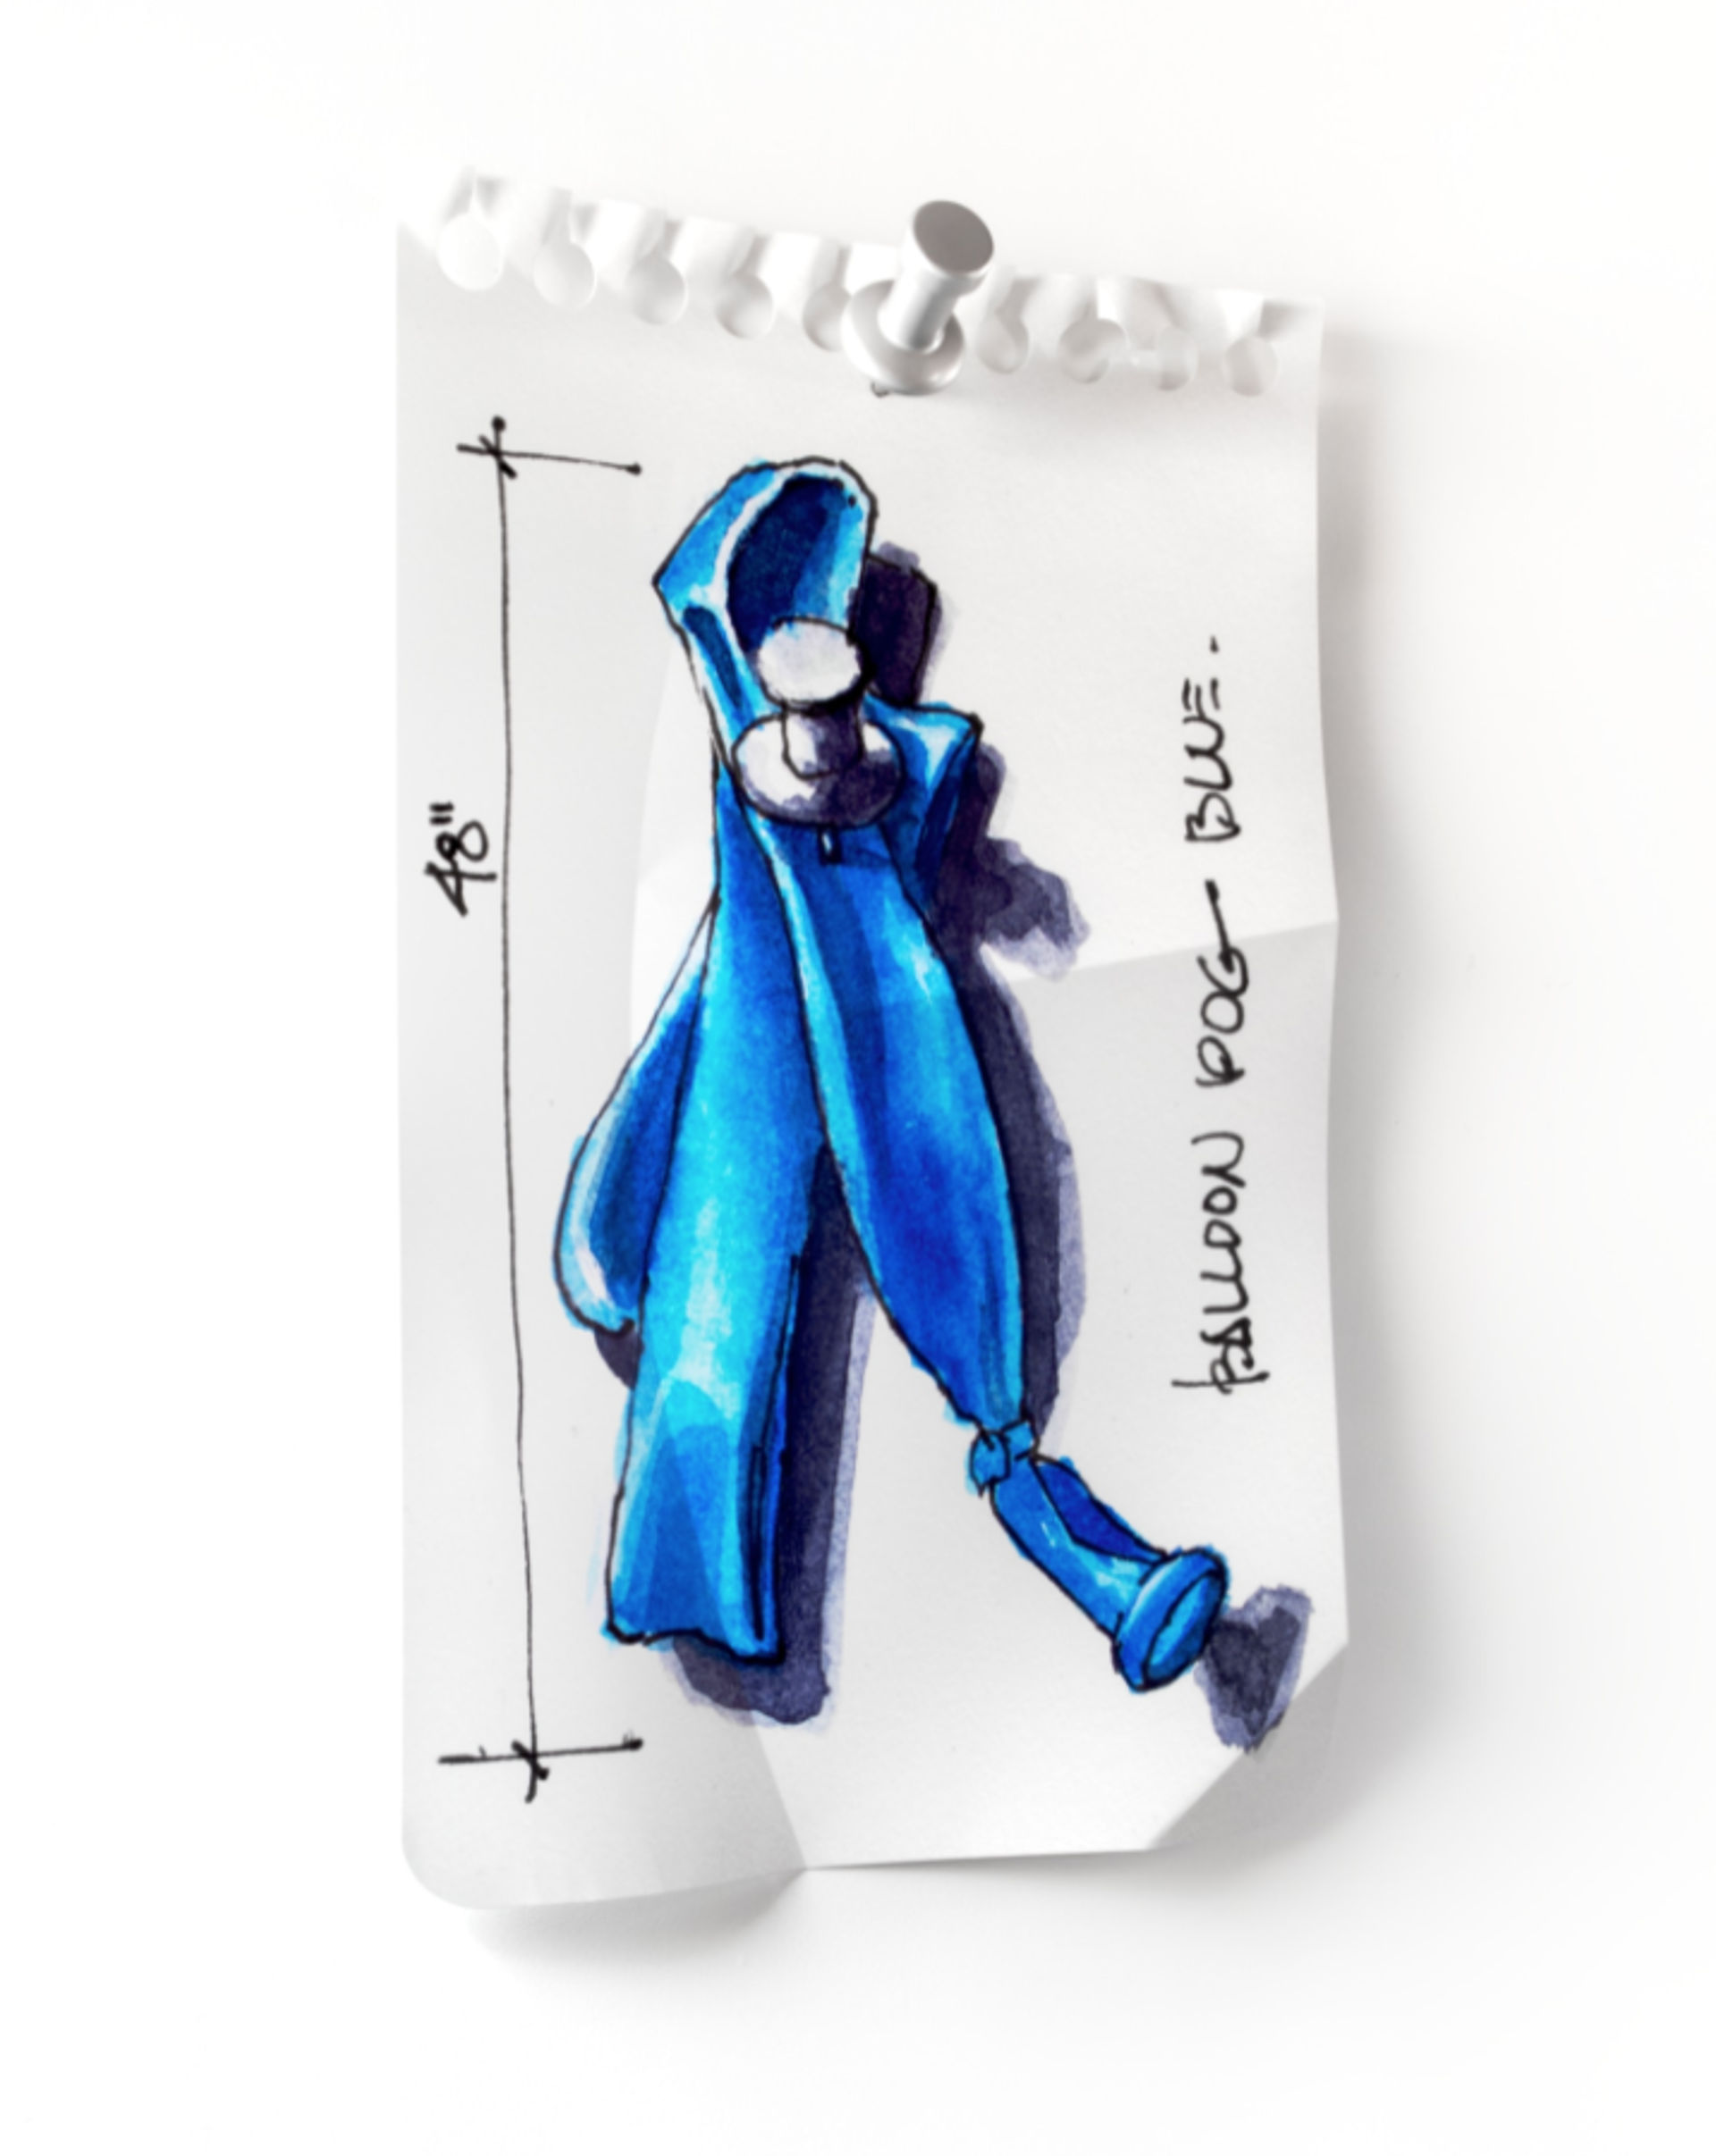 Balloon Dog (blue) by Miles Jaffe